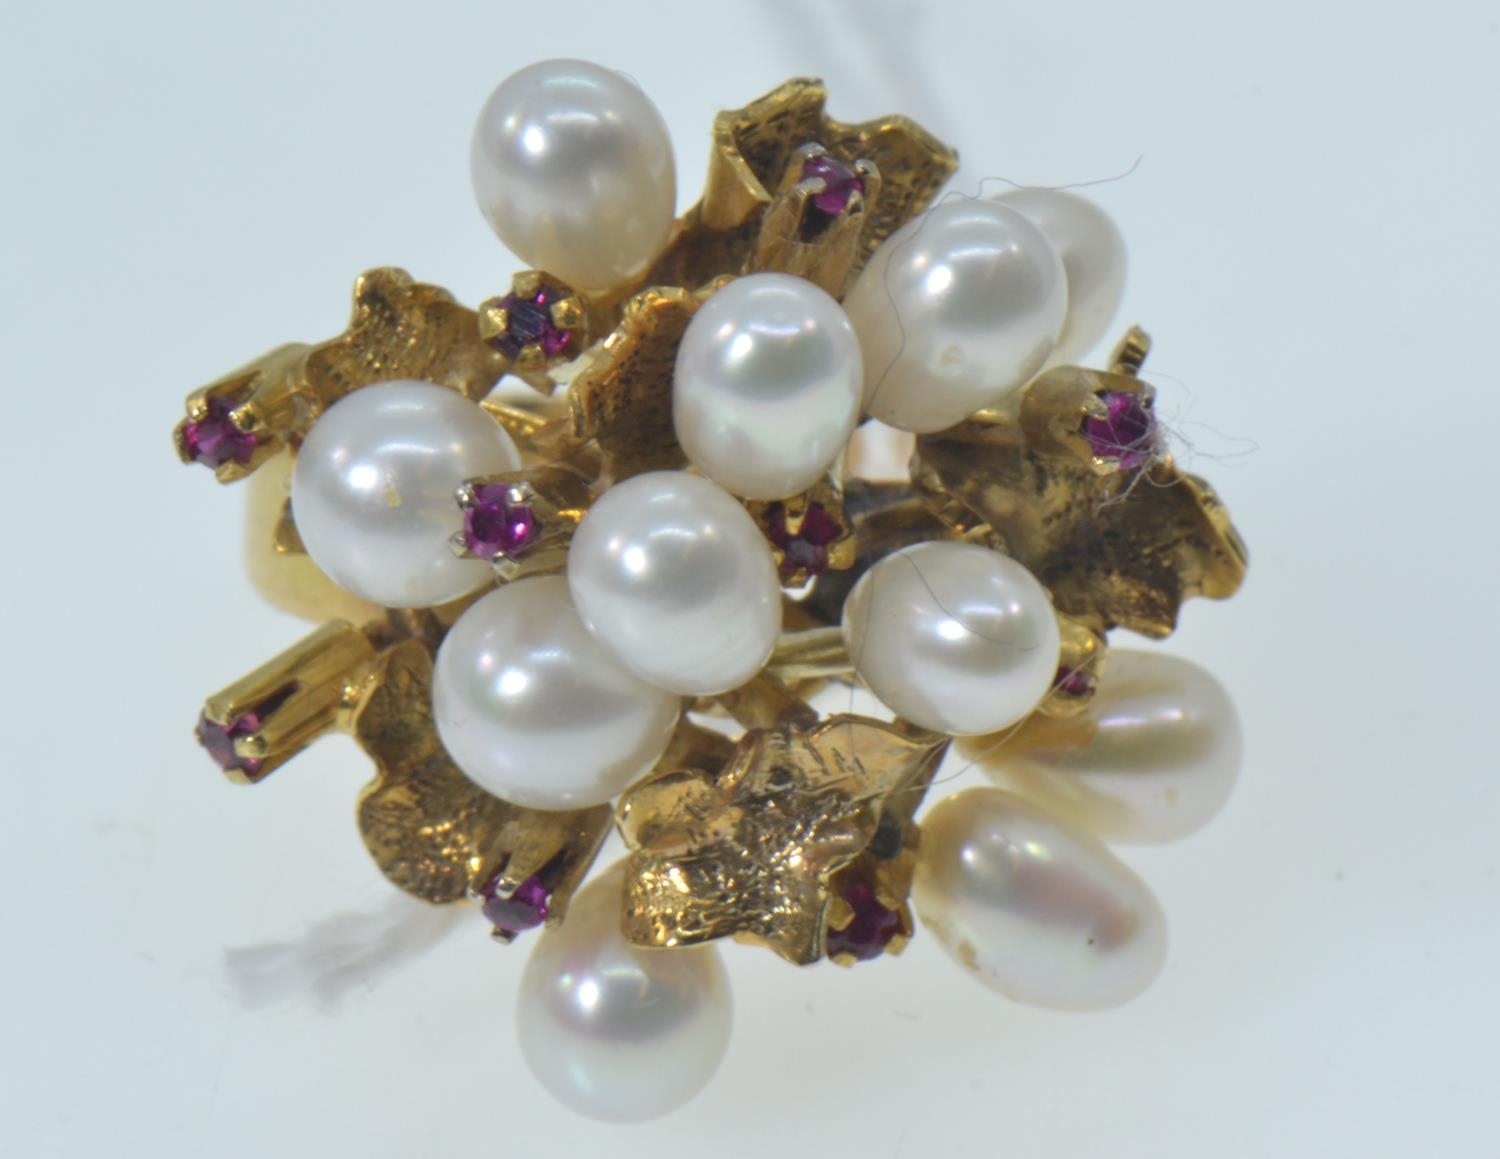 14ct gold cluster ring set with eleven pearls and ten rubies, marked 14K, size L, gross weight 7 gra - Image 2 of 5